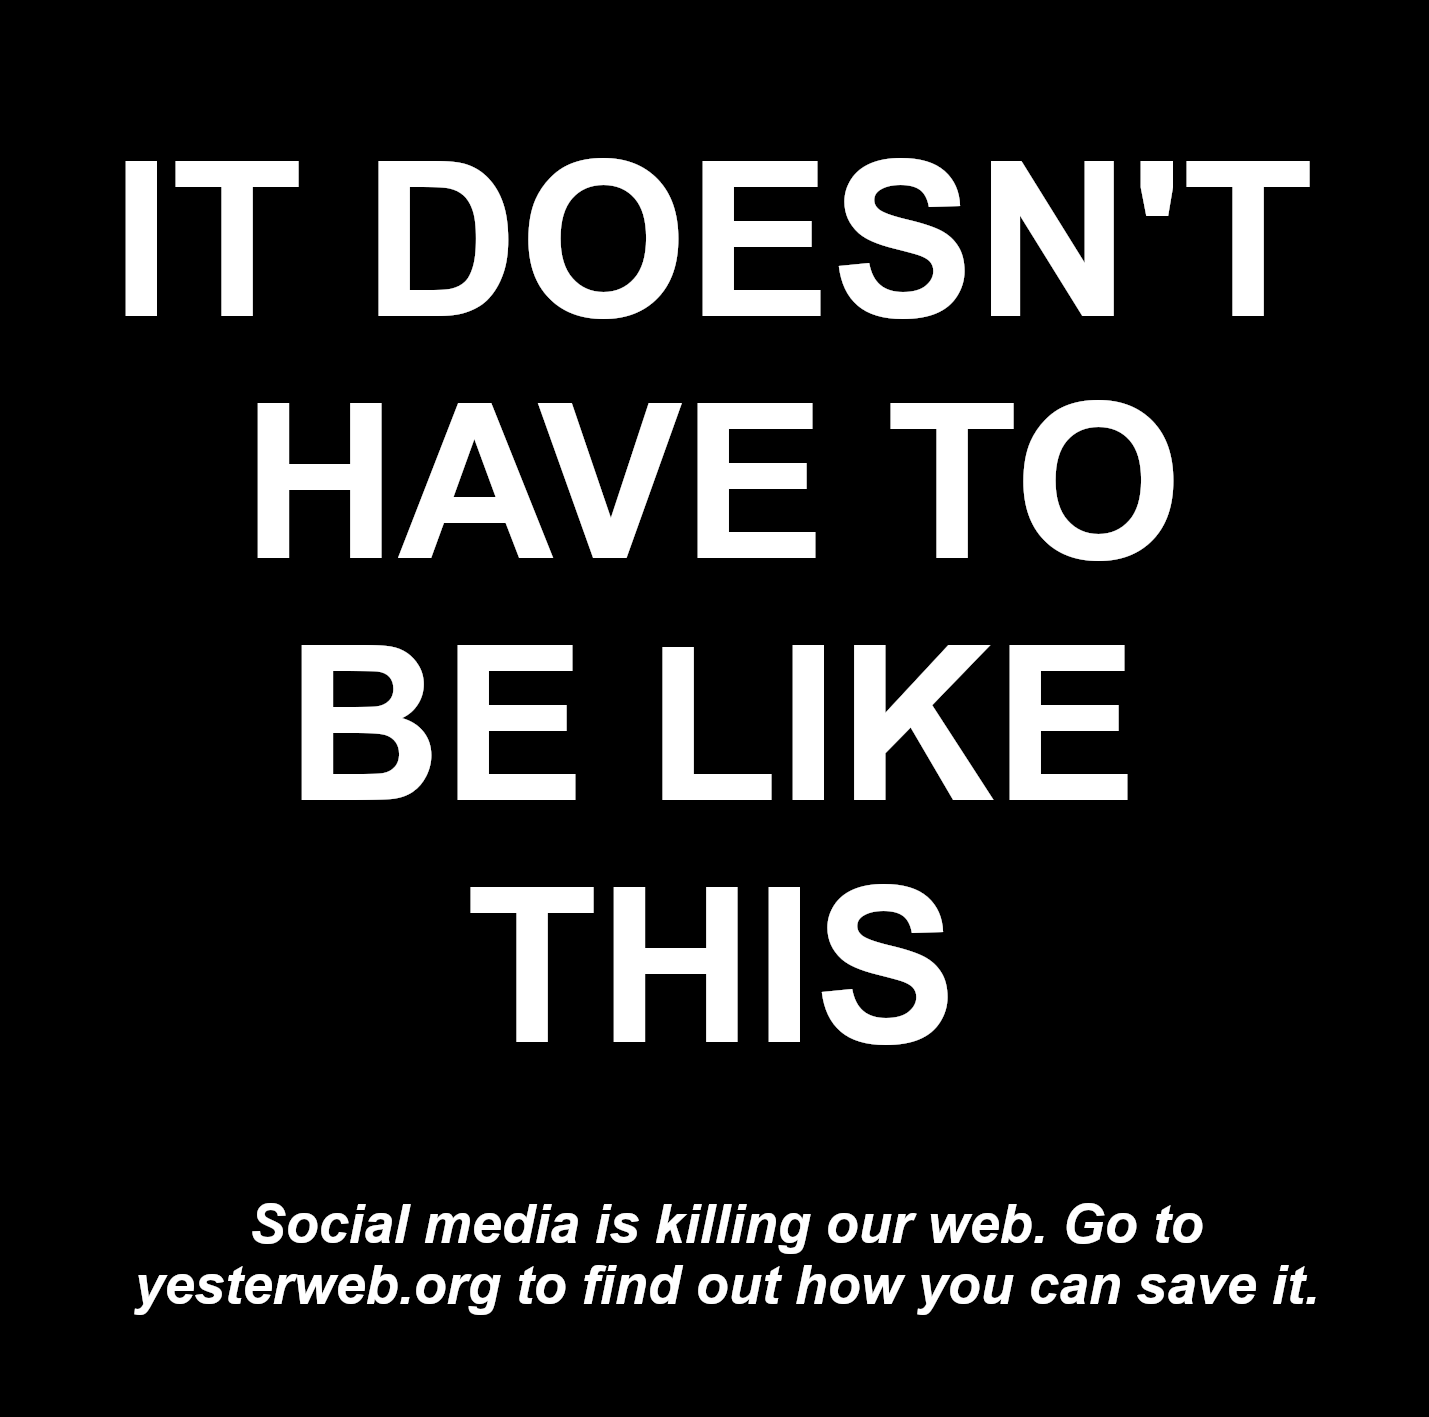 IT DOESN'T HAVE TO BE LIKE THIS; Social media is killing our web. Go to yesterweb.org to find out how you can save it.